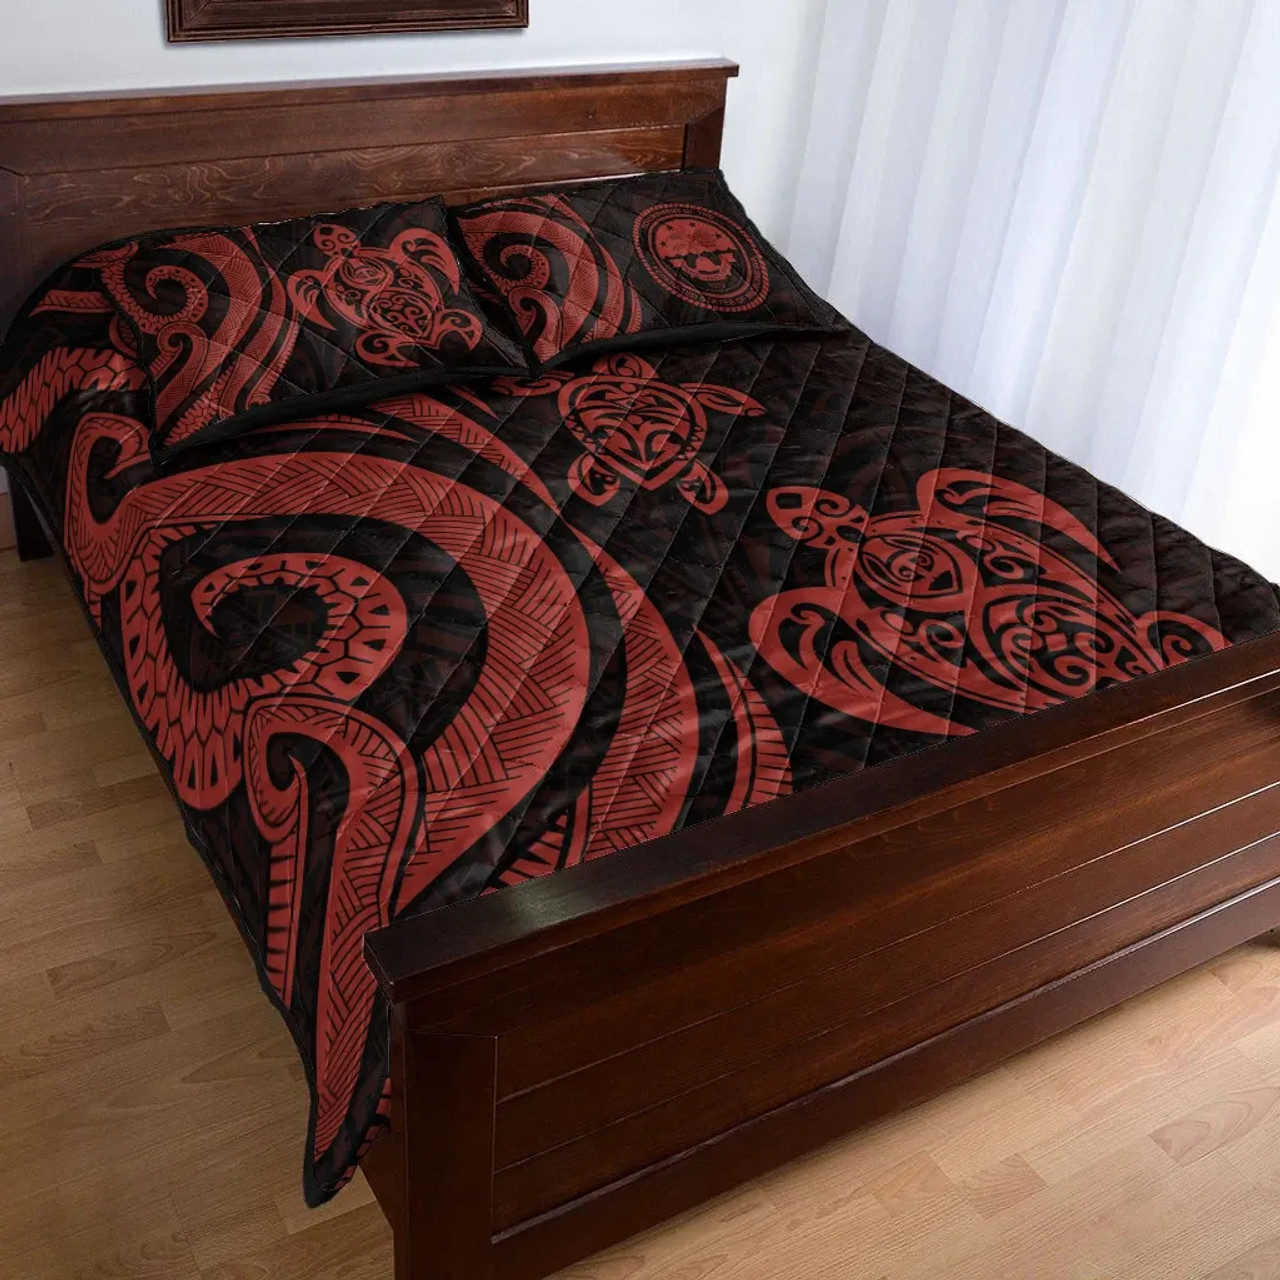 Federated States of Micronesia Quilt Bed Set - Red Tentacle Turtle 3